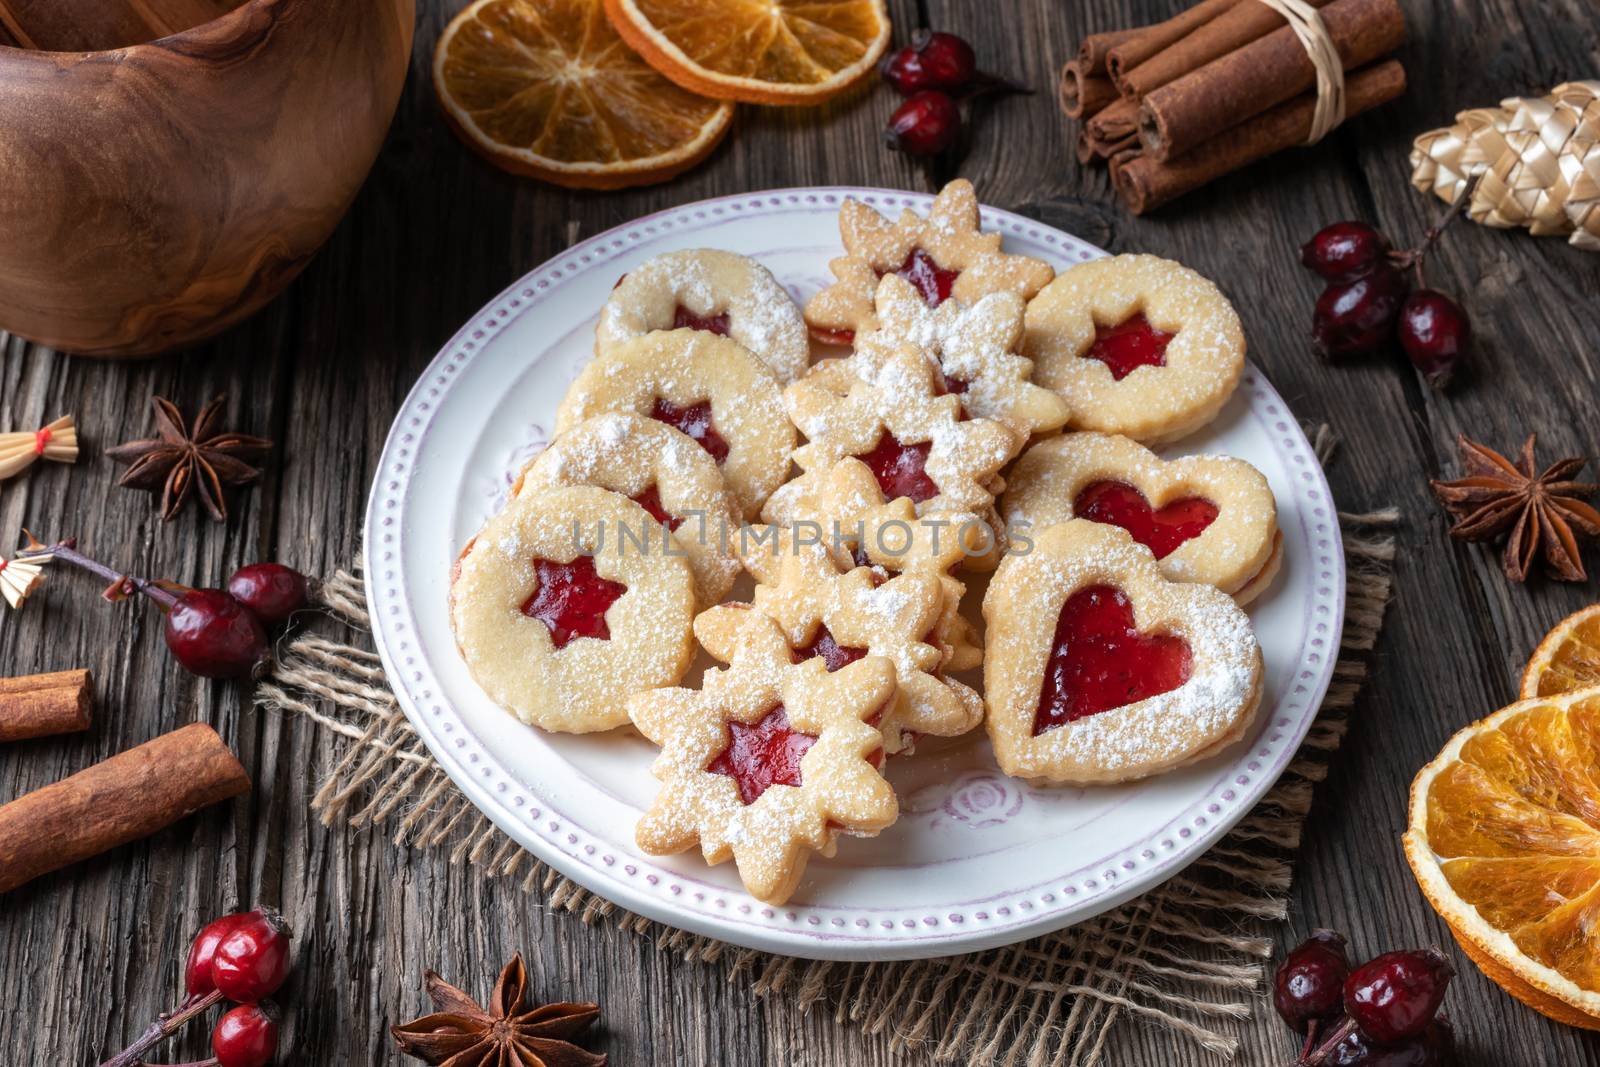 Traditional Linzer Christmas cookies filled with strawberry jam on a wooden table